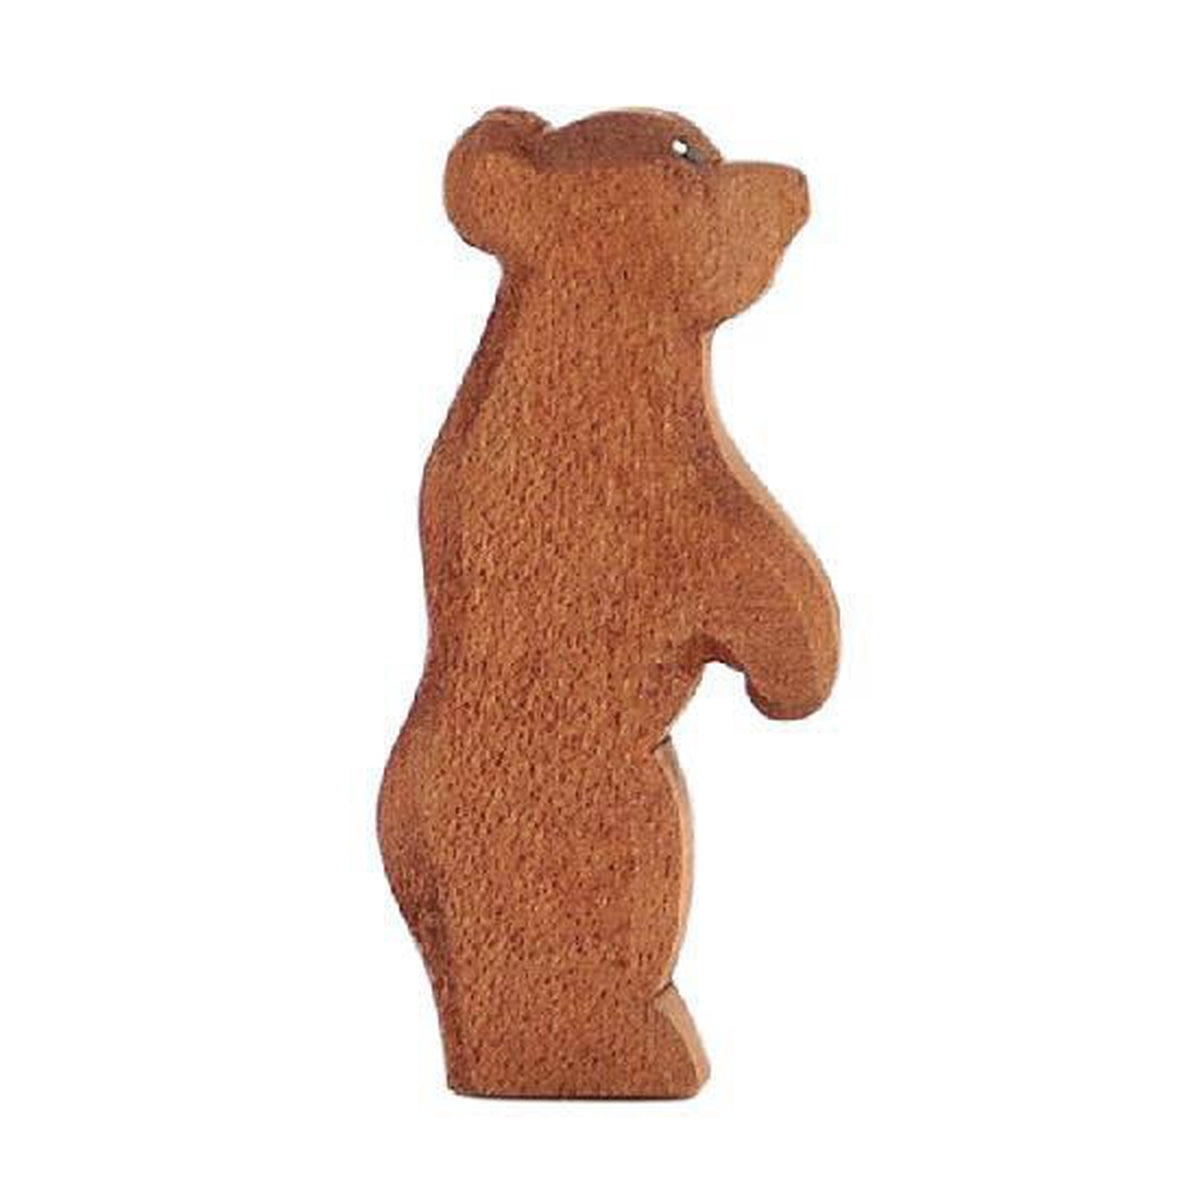 Ostheimer wooden bear cub - standing-people, animals & lands-Fire the Imagination-Dilly Dally Kids